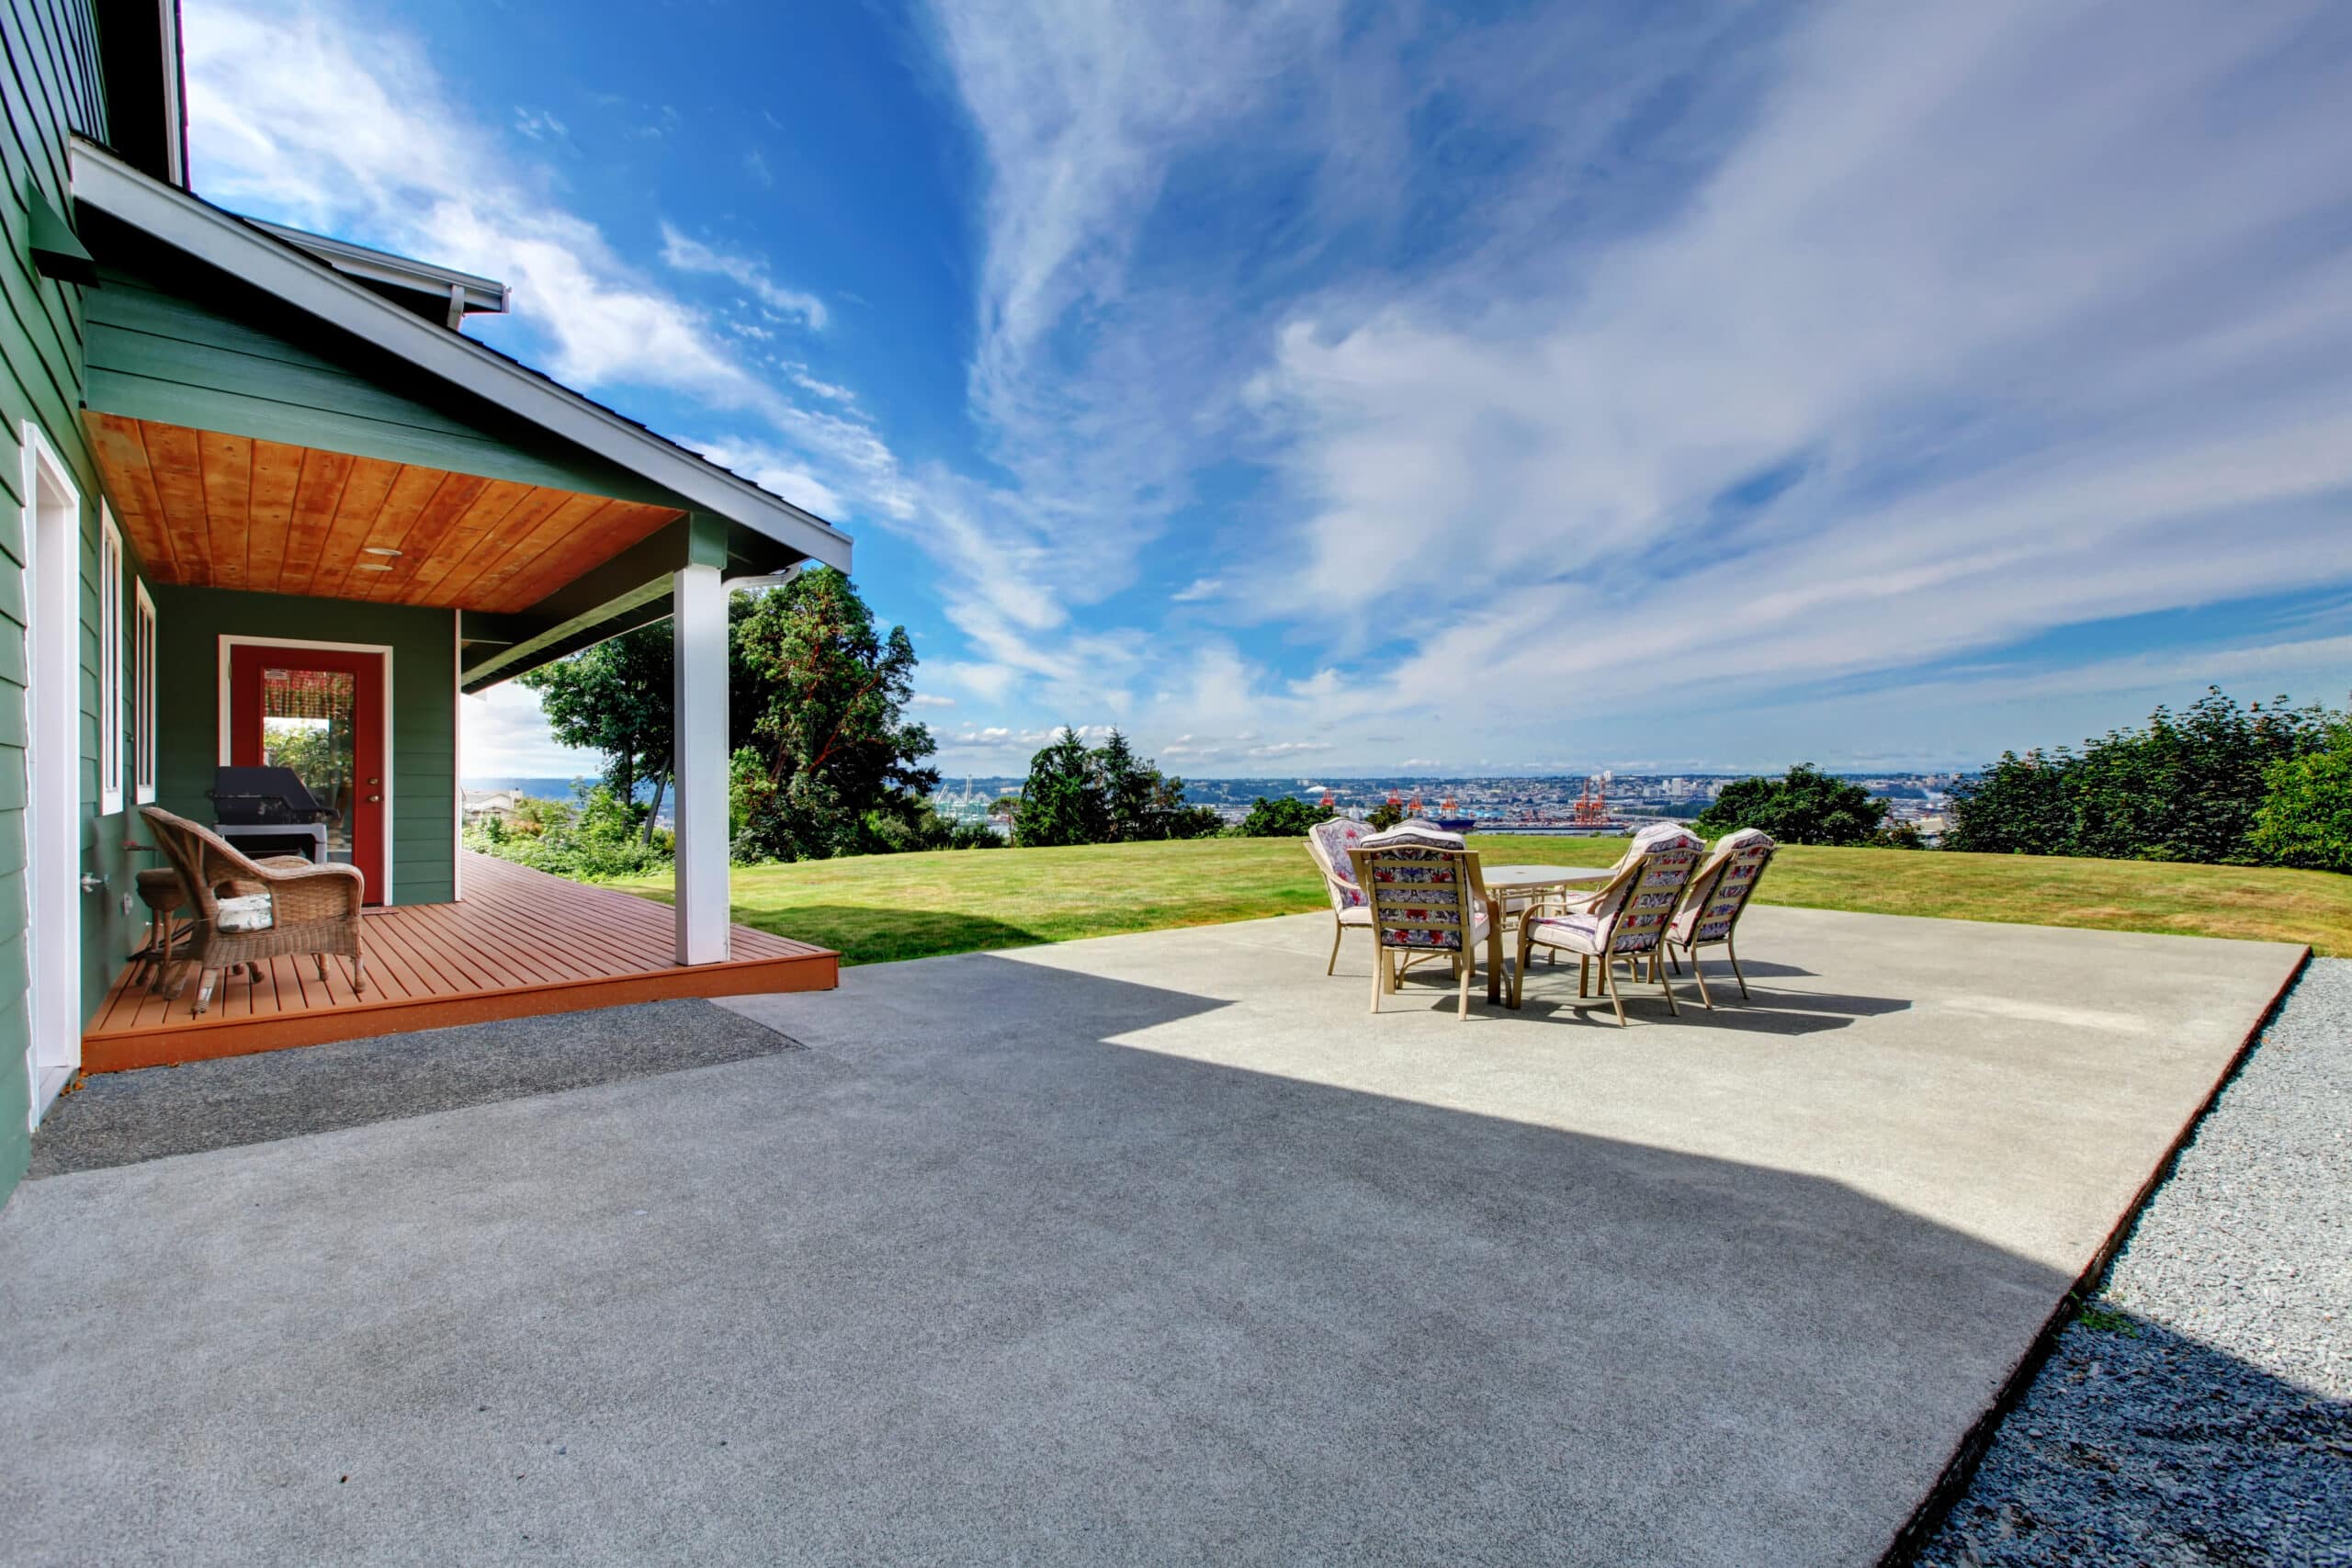 VIew of large concrete floor patio area with table set at backyard. Northwest, USA